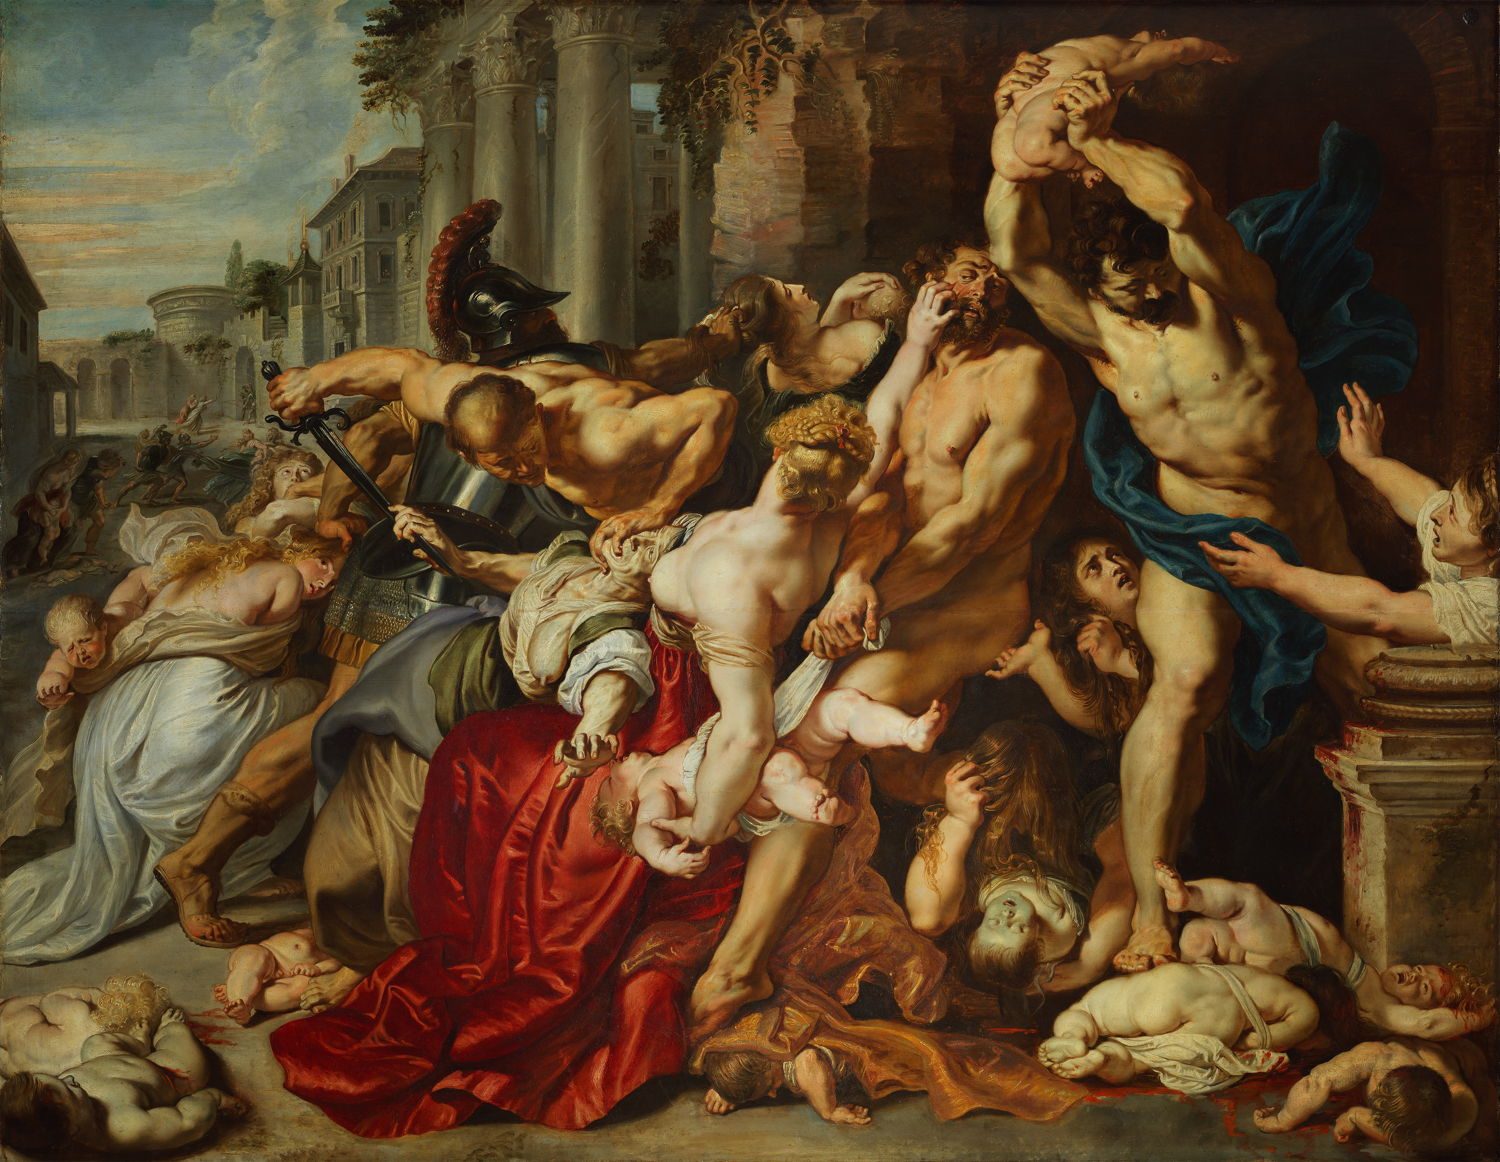 Peter Paul Rubens, The Massacre of the Innocents, The Thomson Collection at the Art Gallery of Ontario, (c) Art Gallery of Ontario